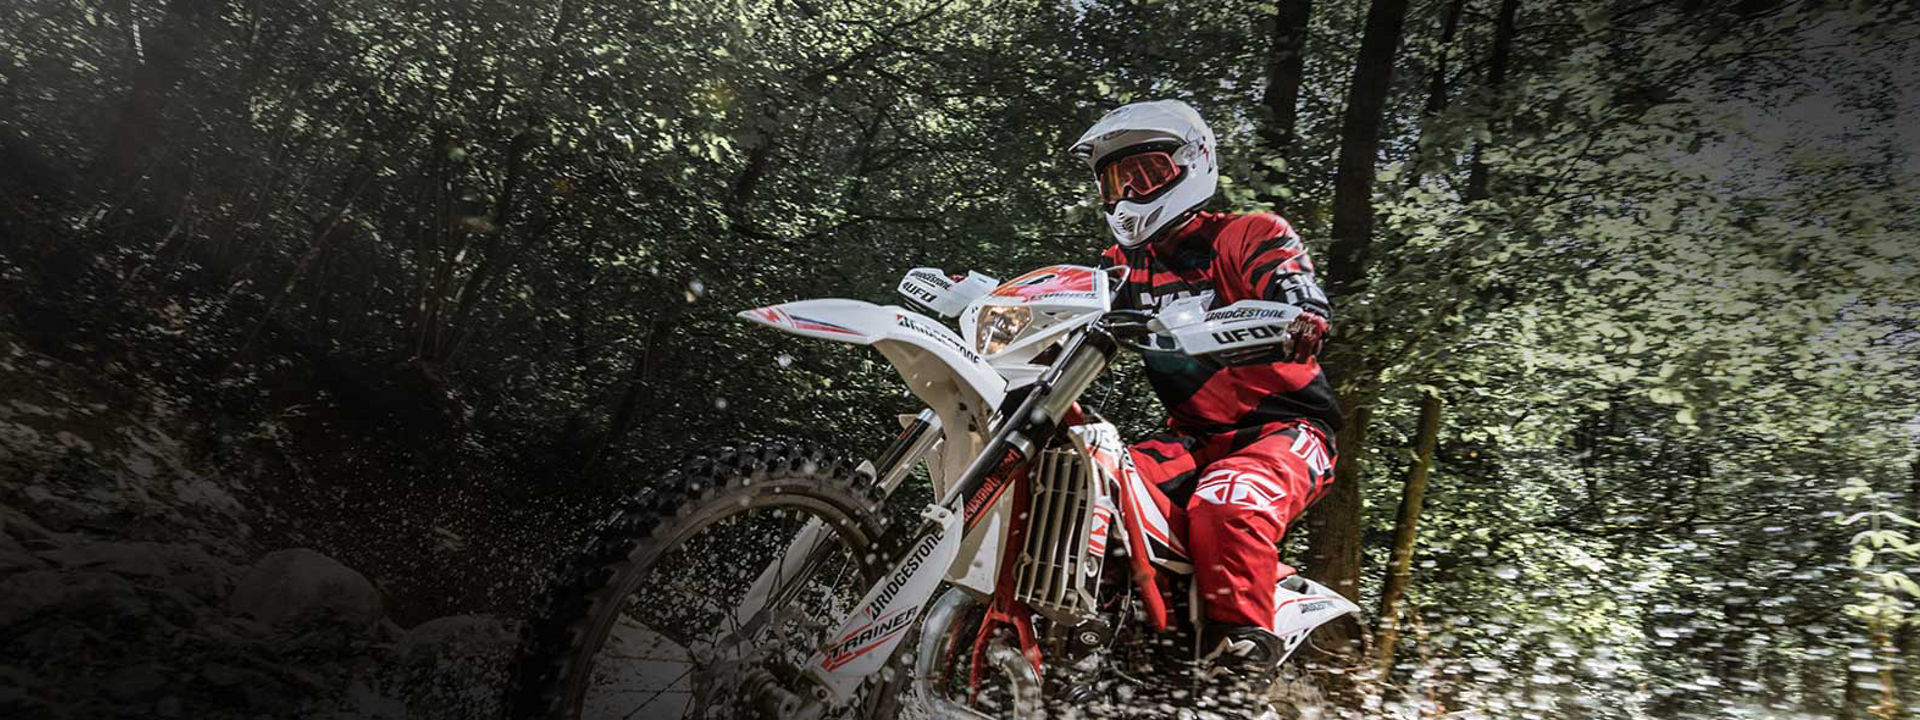 This image shows a motorcyclist using Bridgestone off road motorcycle tyres to explore rough terrain. 